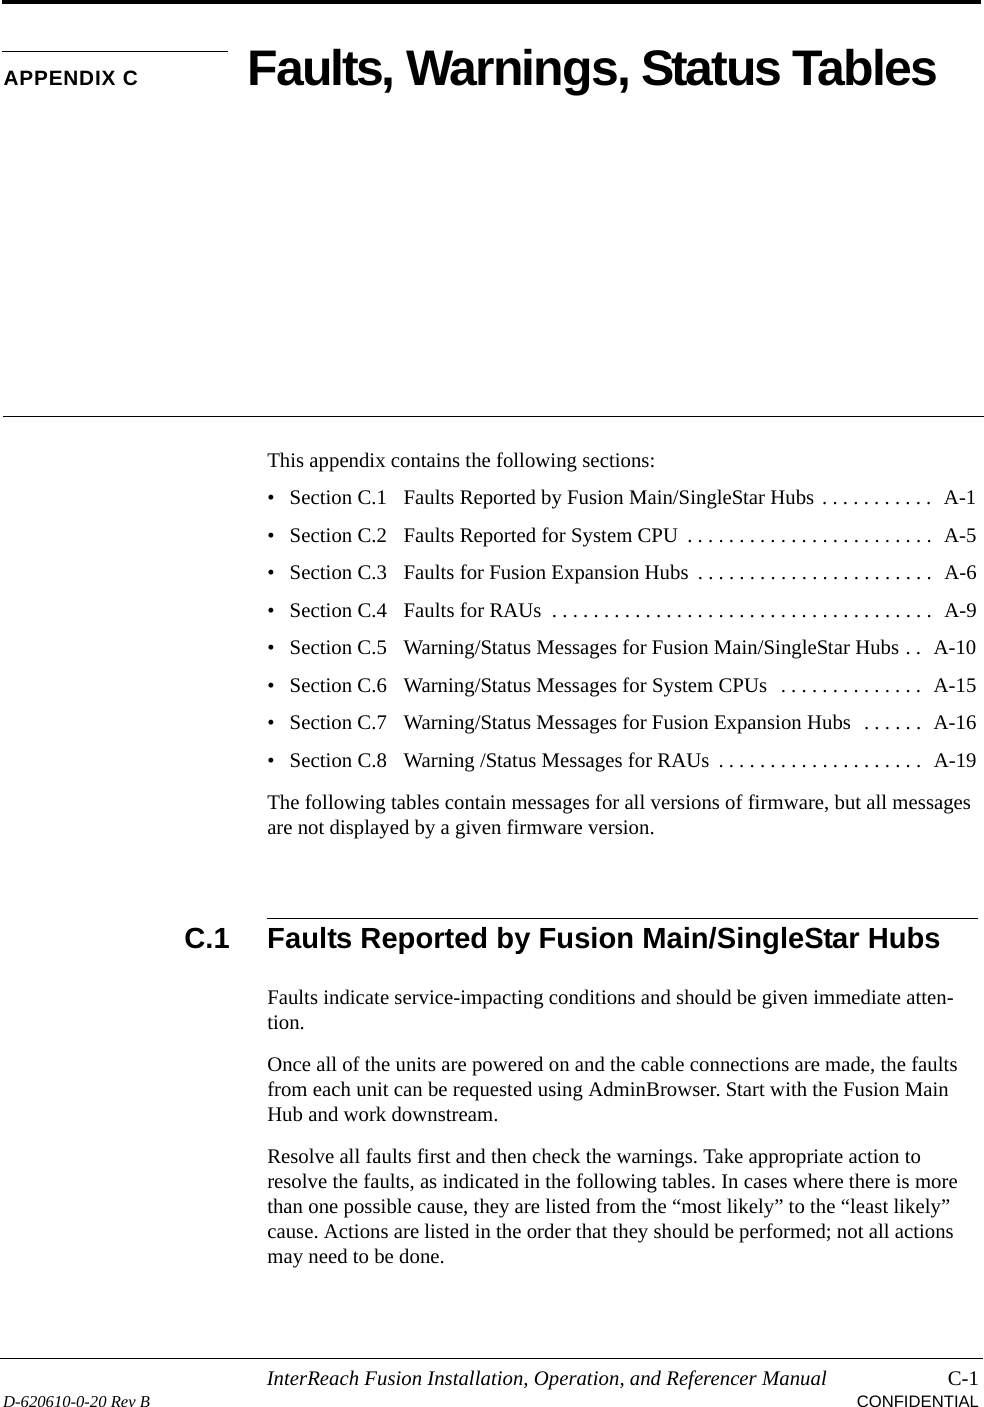 InterReach Fusion Installation, Operation, and Referencer Manual C-1D-620610-0-20 Rev B CONFIDENTIALAPPENDIX C Faults, Warnings, Status TablesThis appendix contains the following sections:• Section C.1   Faults Reported by Fusion Main/SingleStar Hubs . . . . . . . . . . .  A-1• Section C.2   Faults Reported for System CPU  . . . . . . . . . . . . . . . . . . . . . . . .  A-5• Section C.3   Faults for Fusion Expansion Hubs  . . . . . . . . . . . . . . . . . . . . . . .  A-6• Section C.4   Faults for RAUs  . . . . . . . . . . . . . . . . . . . . . . . . . . . . . . . . . . . . .  A-9• Section C.5   Warning/Status Messages for Fusion Main/SingleStar Hubs . .  A-10• Section C.6   Warning/Status Messages for System CPUs  . . . . . . . . . . . . . .  A-15• Section C.7   Warning/Status Messages for Fusion Expansion Hubs  . . . . . .  A-16• Section C.8   Warning /Status Messages for RAUs  . . . . . . . . . . . . . . . . . . . .  A-19The following tables contain messages for all versions of firmware, but all messages are not displayed by a given firmware version.C.1 Faults Reported by Fusion Main/SingleStar HubsFaults indicate service-impacting conditions and should be given immediate atten-tion.Once all of the units are powered on and the cable connections are made, the faults from each unit can be requested using AdminBrowser. Start with the Fusion Main Hub and work downstream.Resolve all faults first and then check the warnings. Take appropriate action to resolve the faults, as indicated in the following tables. In cases where there is more than one possible cause, they are listed from the “most likely” to the “least likely” cause. Actions are listed in the order that they should be performed; not all actions may need to be done.